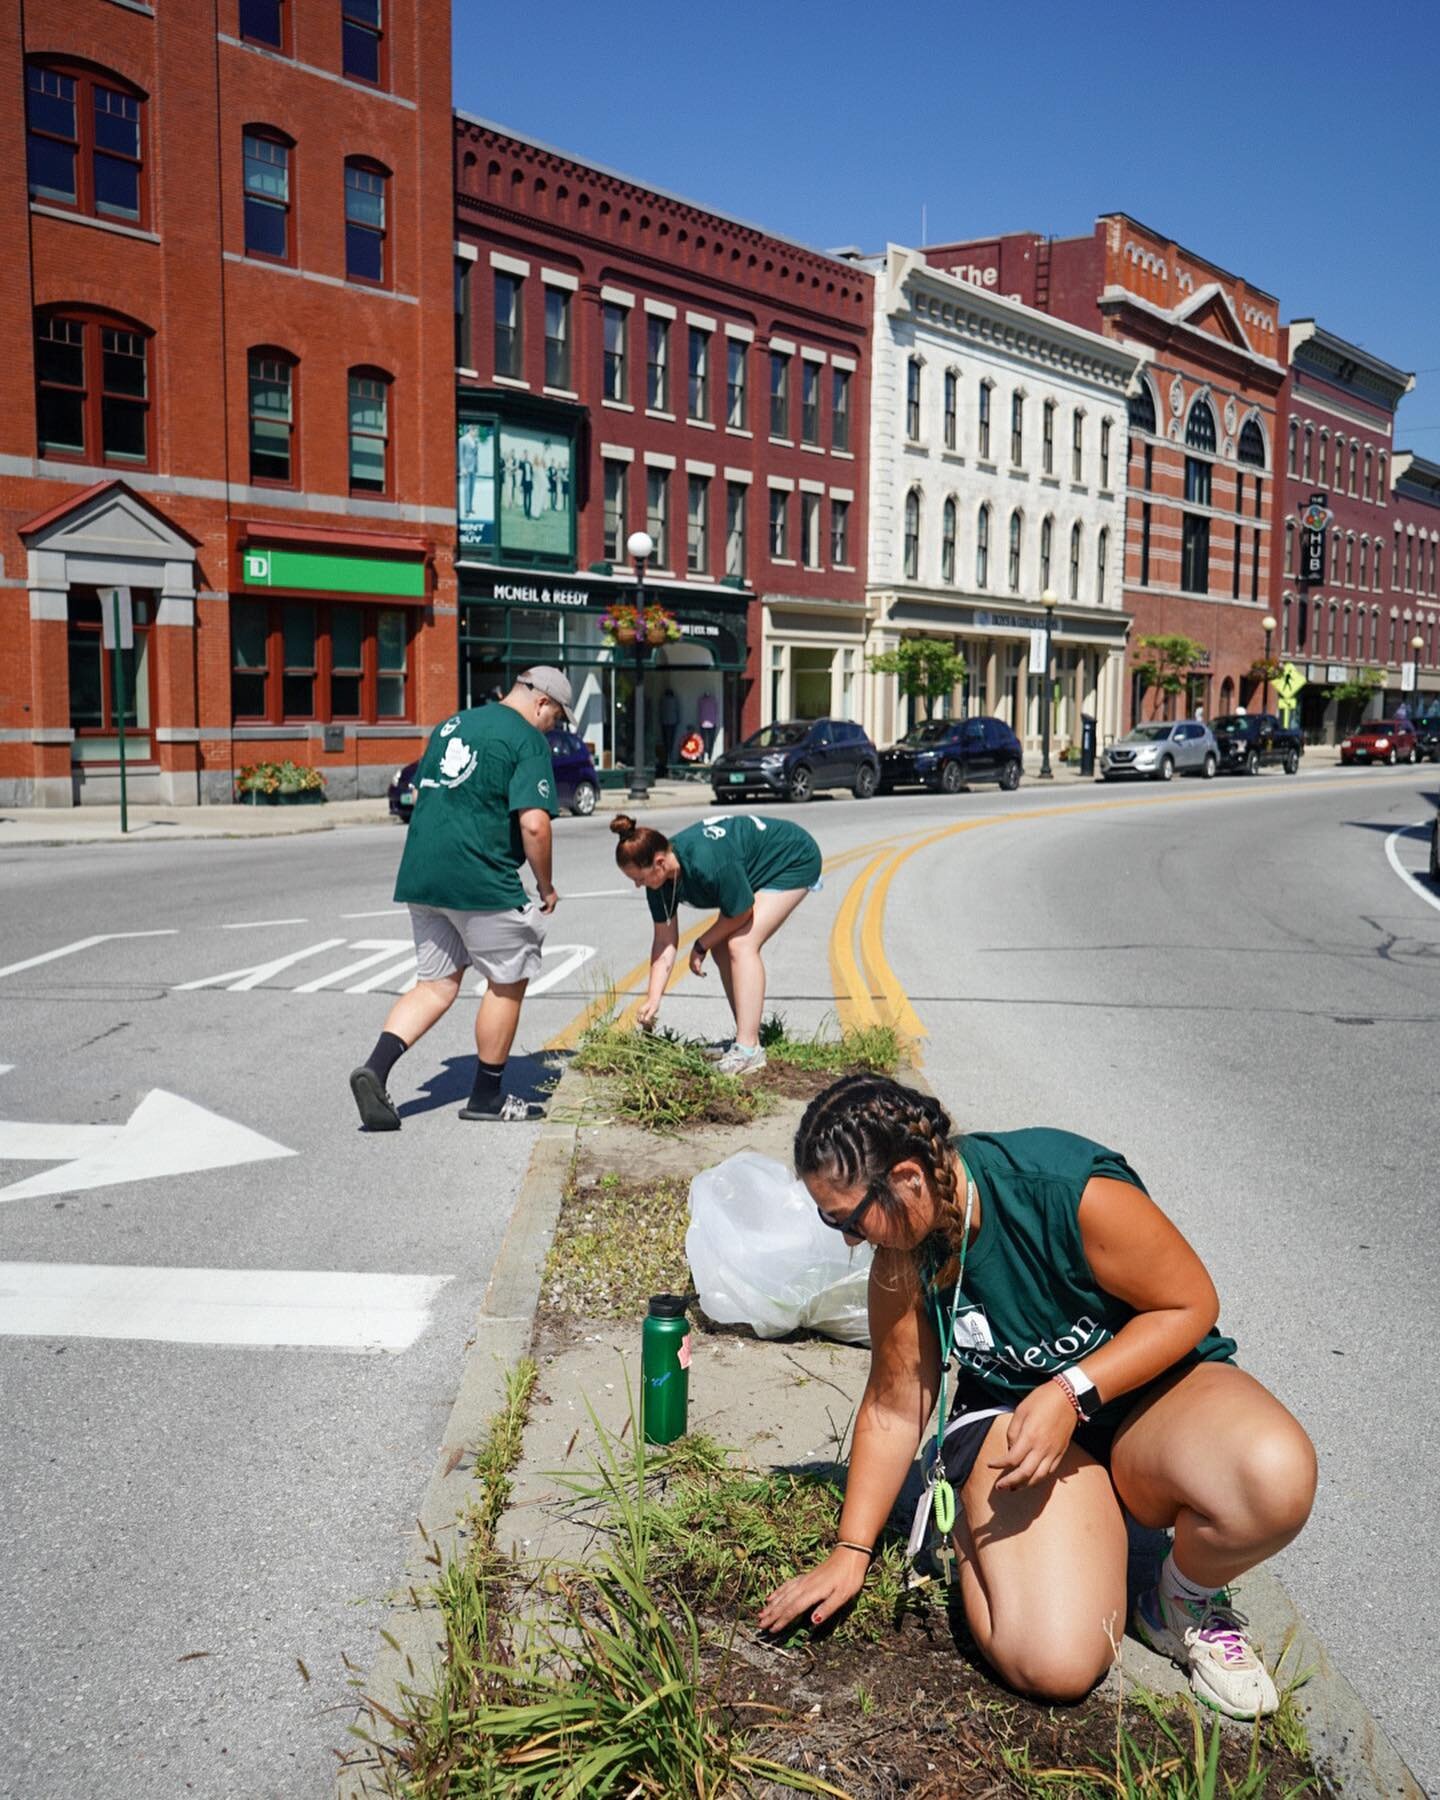 A big THANK YOU to @castletonedu for spending part of your orientation journey with Downtown Rutland! New Castleton students spent the morning participating in various projects that help to brighten up our beautiful Downtown. What a way to give back 